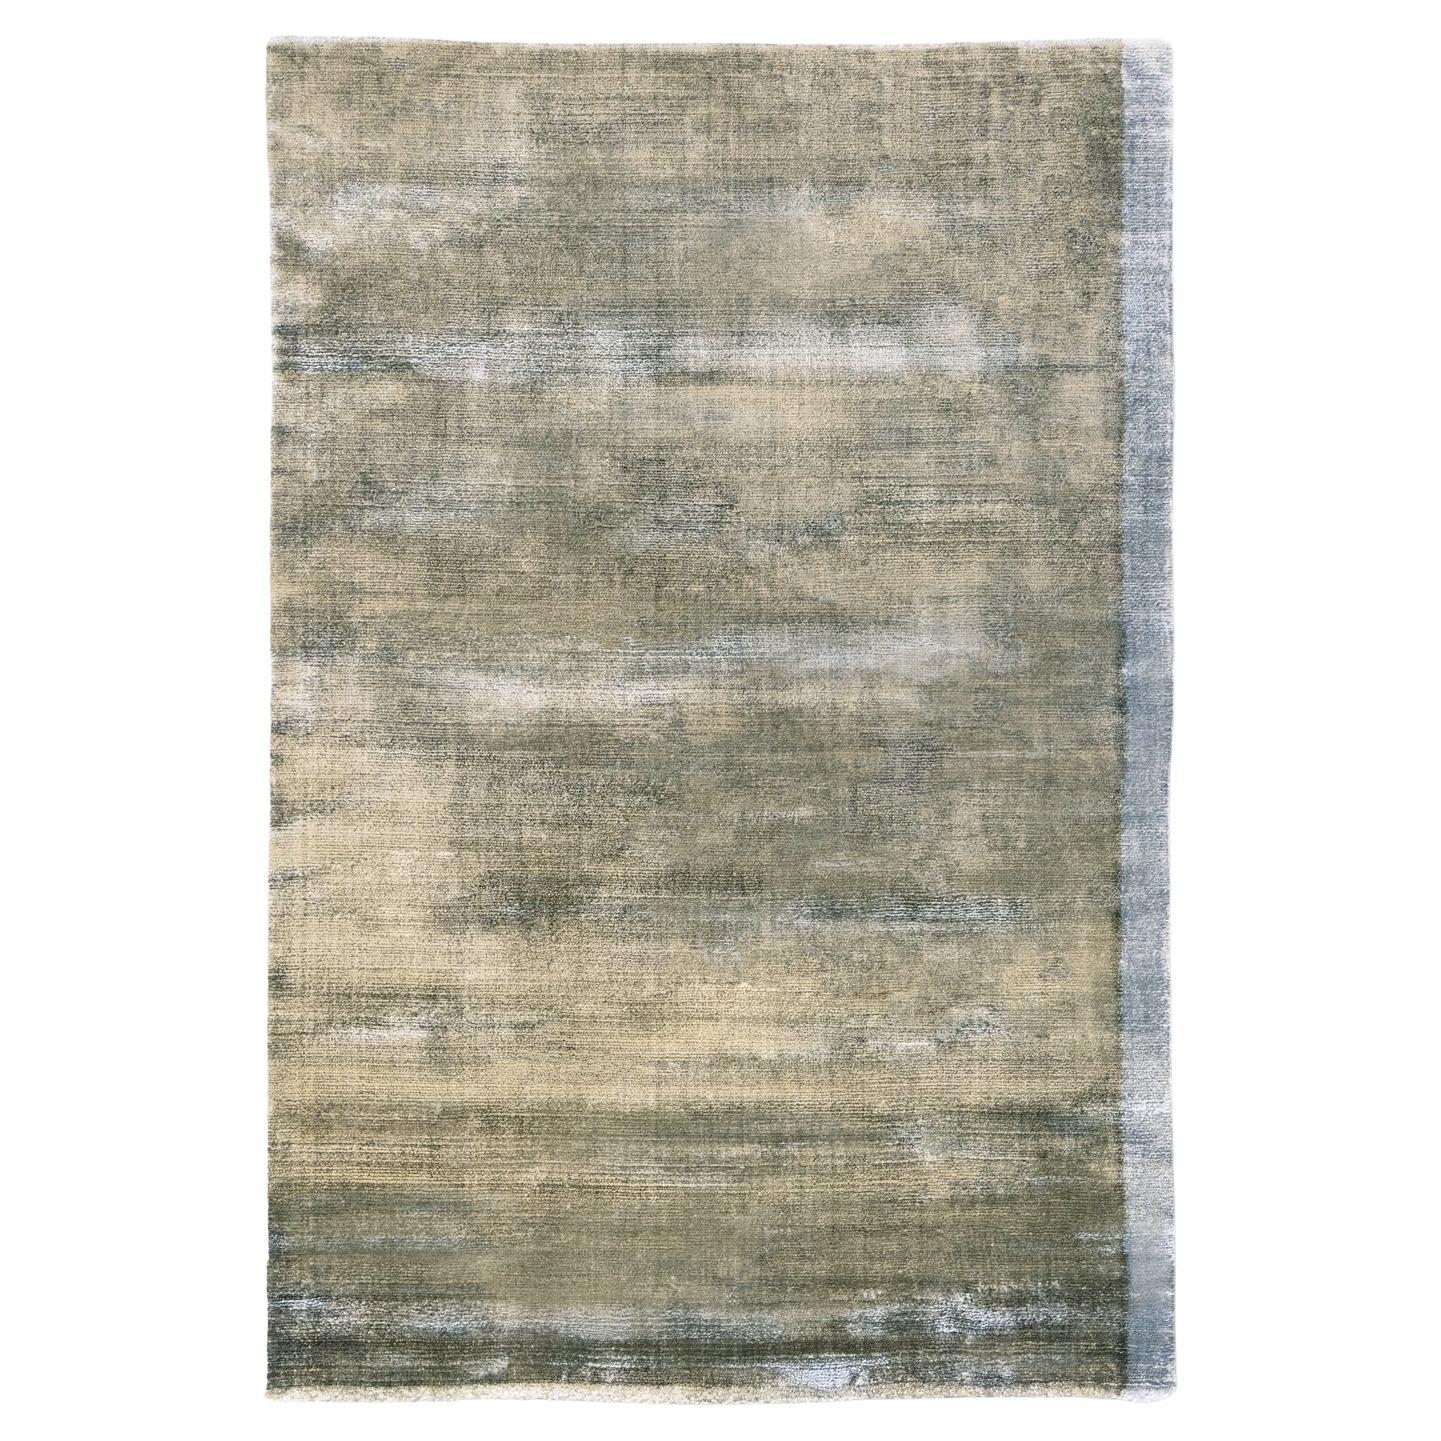 21st Century Shiny Velvety Green Rug by Deanna Comellini in Stock 200x300 cm